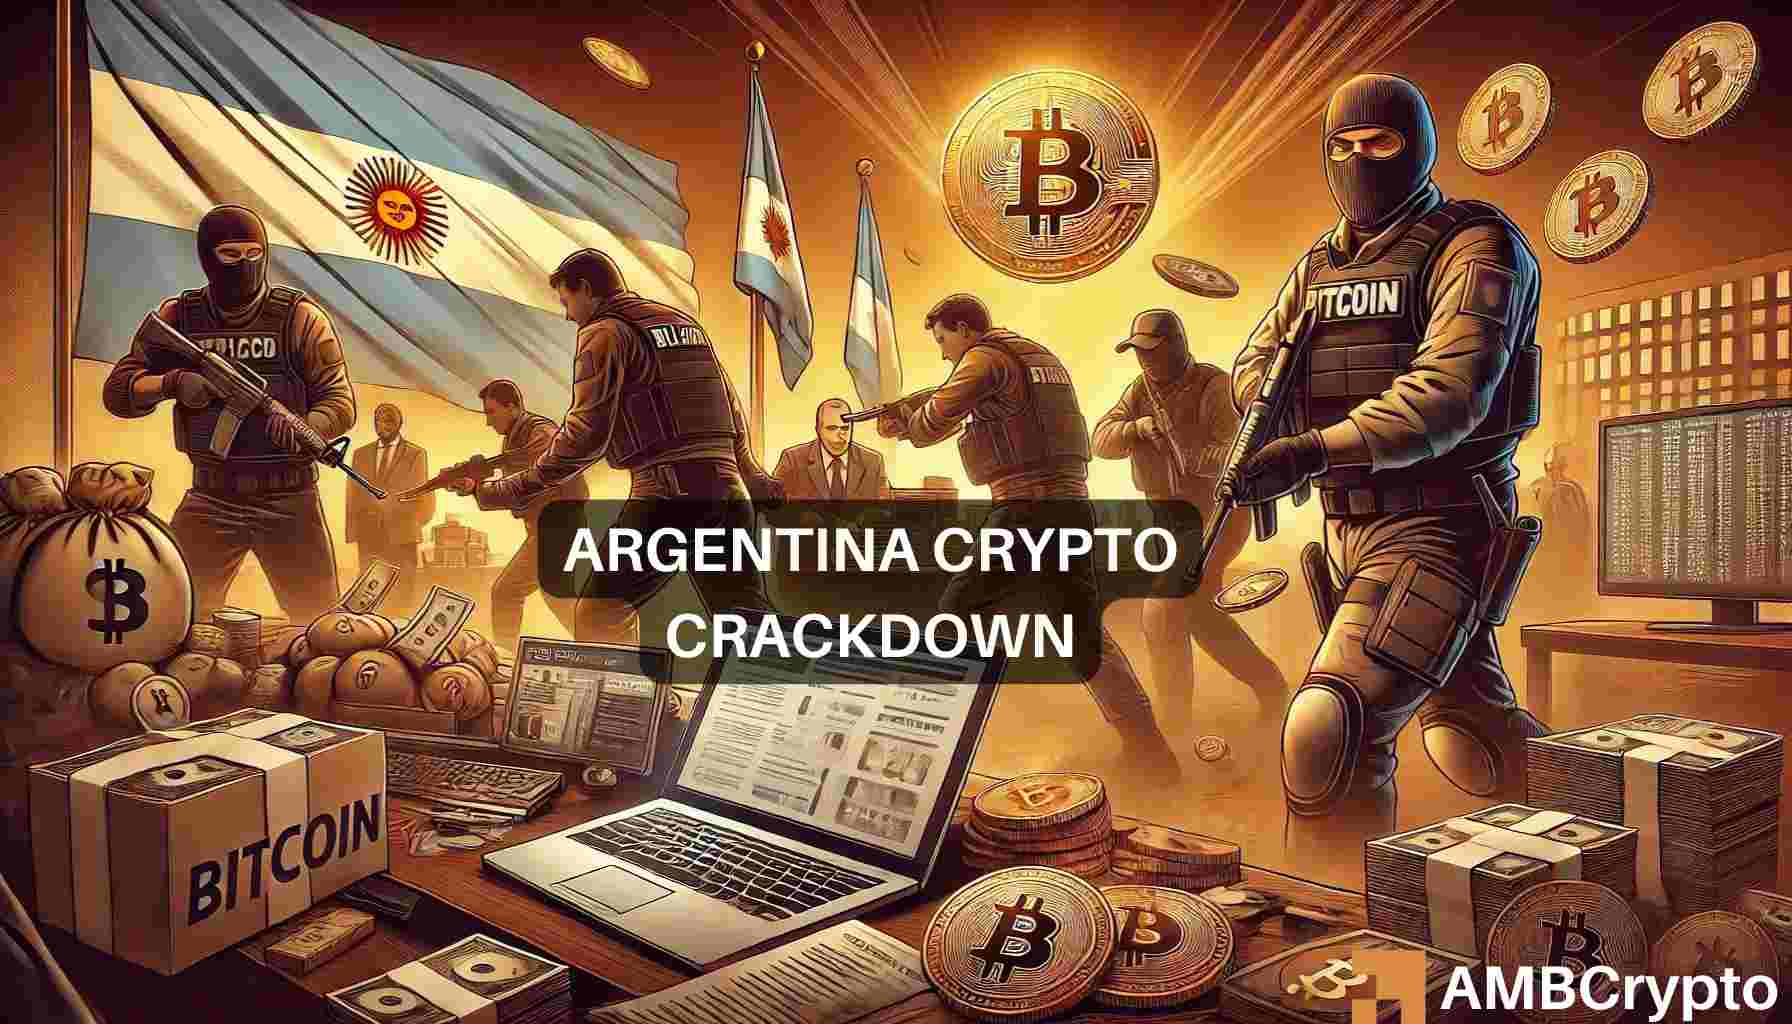 Argentina’s crypto crackdown gathers pace after FATF’s pressure